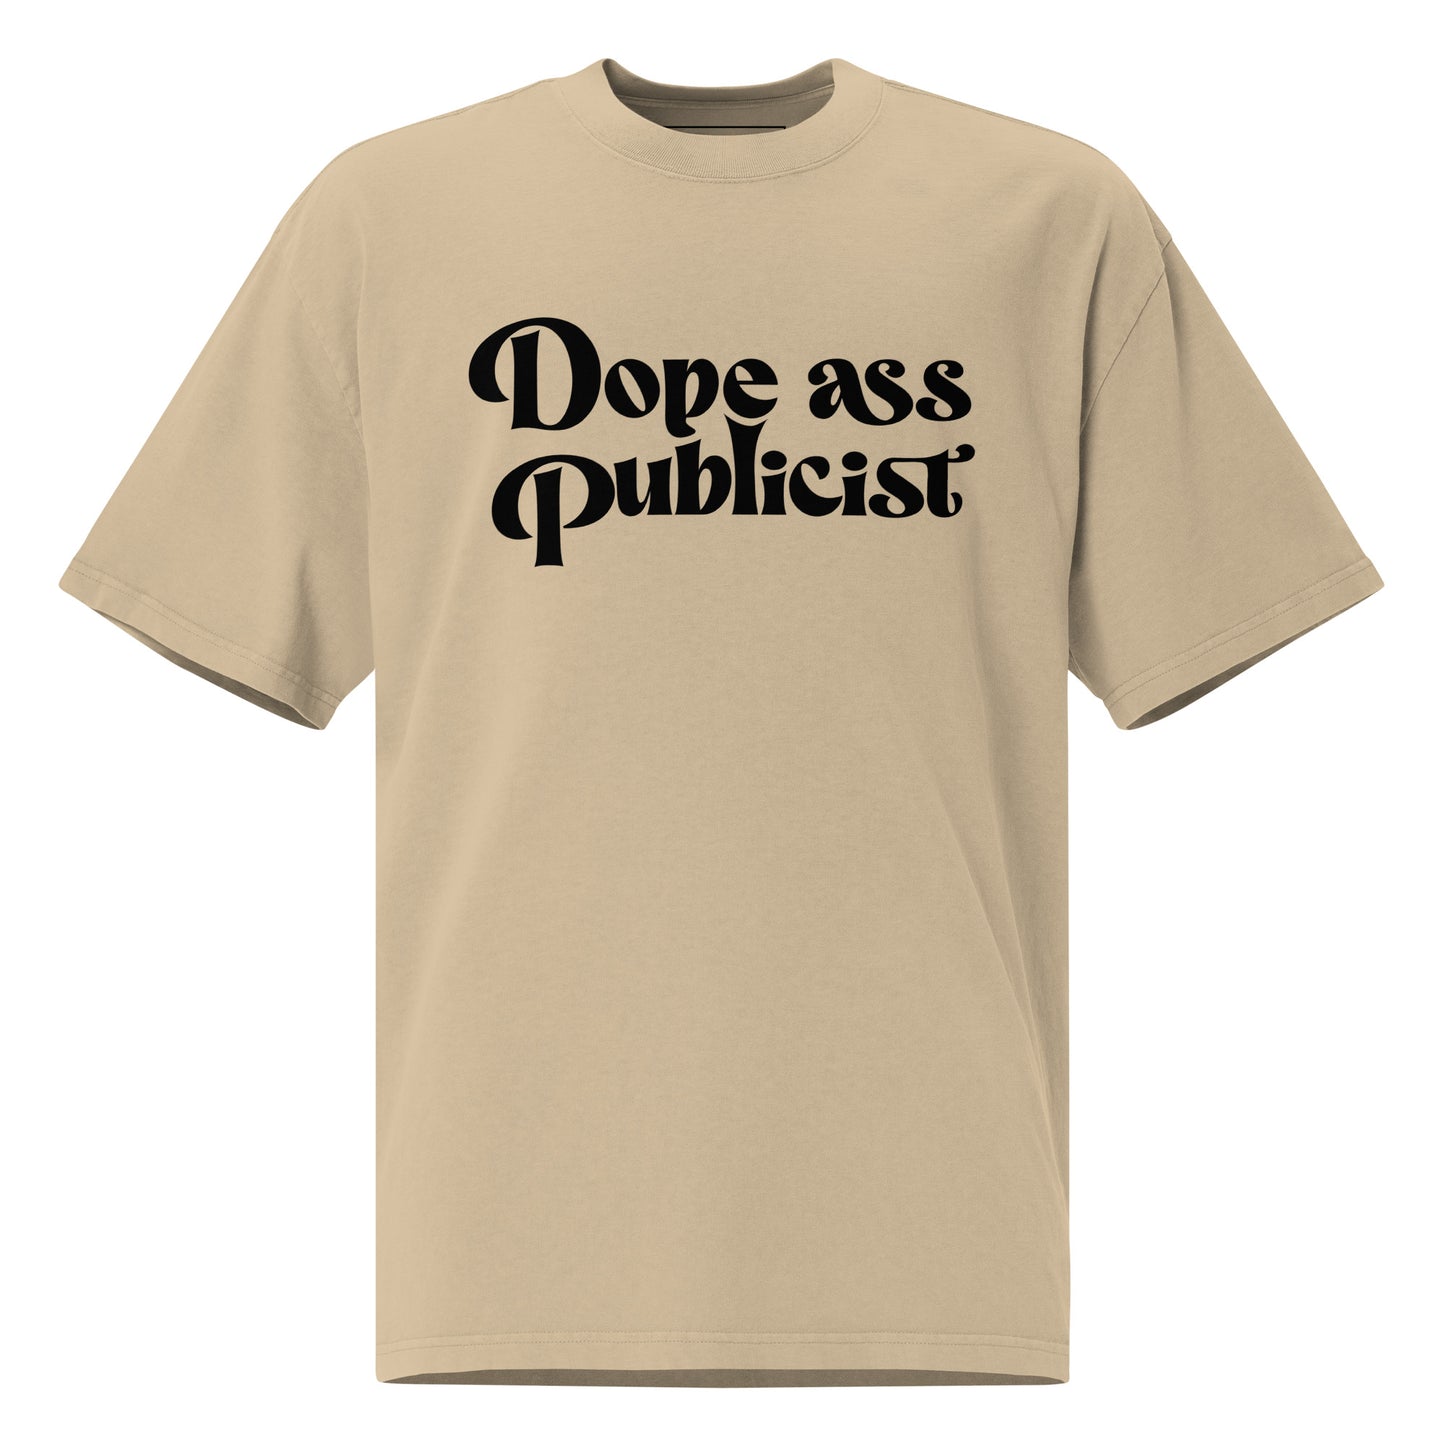 Dope Ass Publicist Printed Oversized faded t-shirt